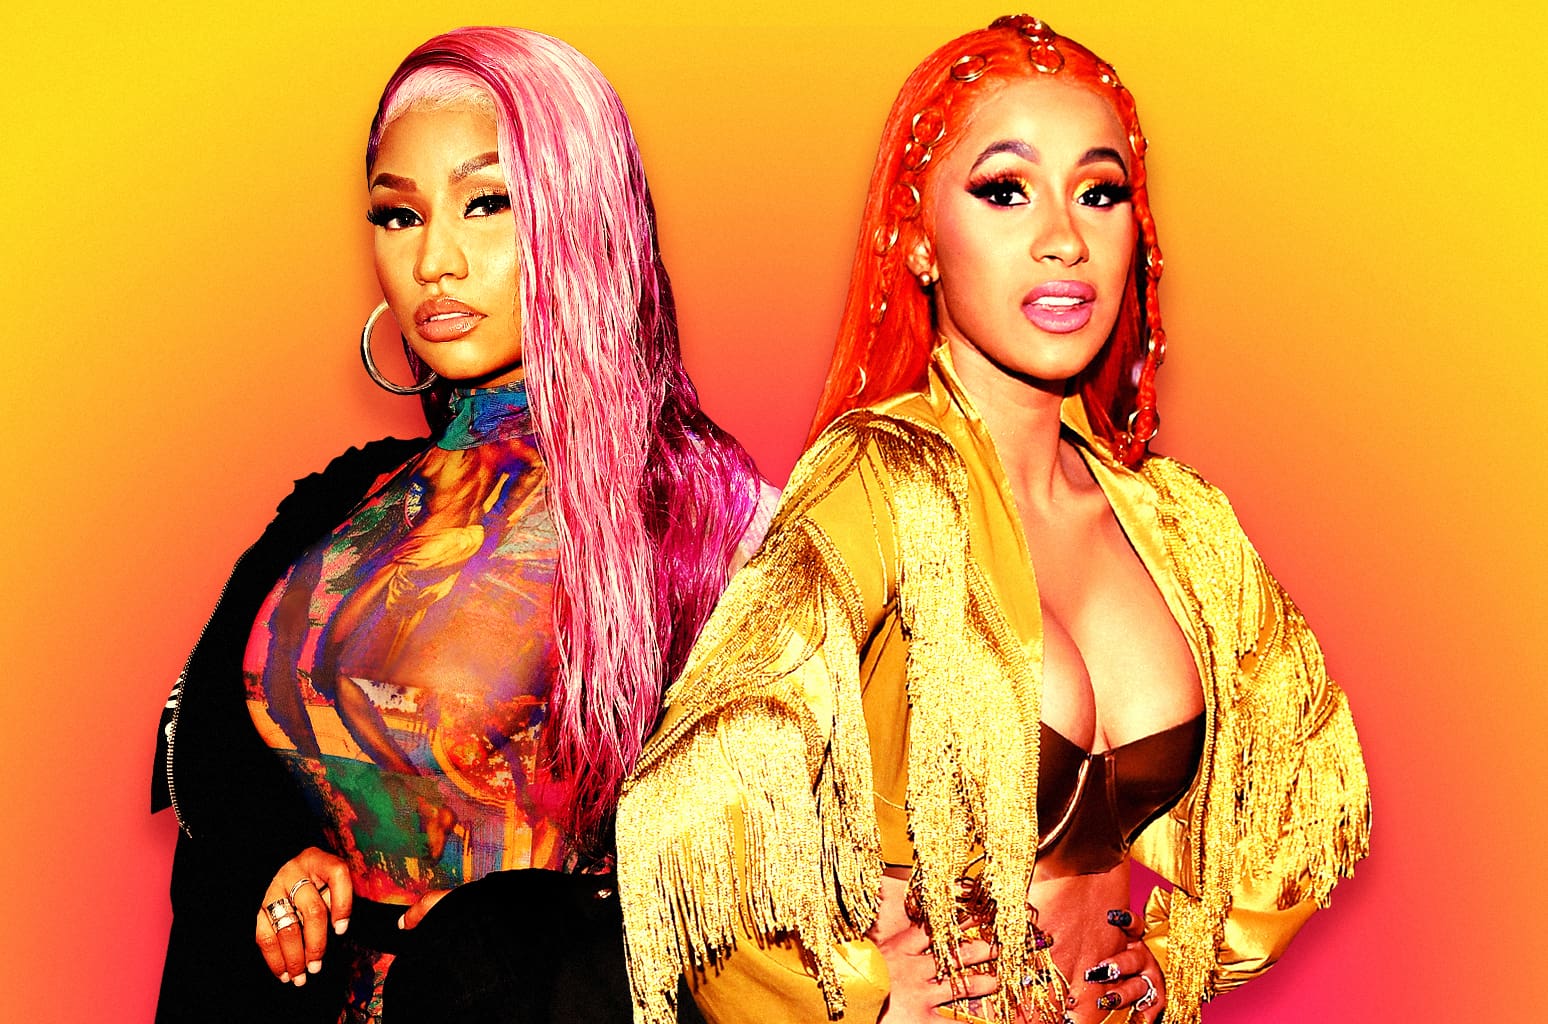 Nicki Minaj Slams Hater Who Accused Her Of Not Being As Supportive As Cardi B Of Other Female Rappers